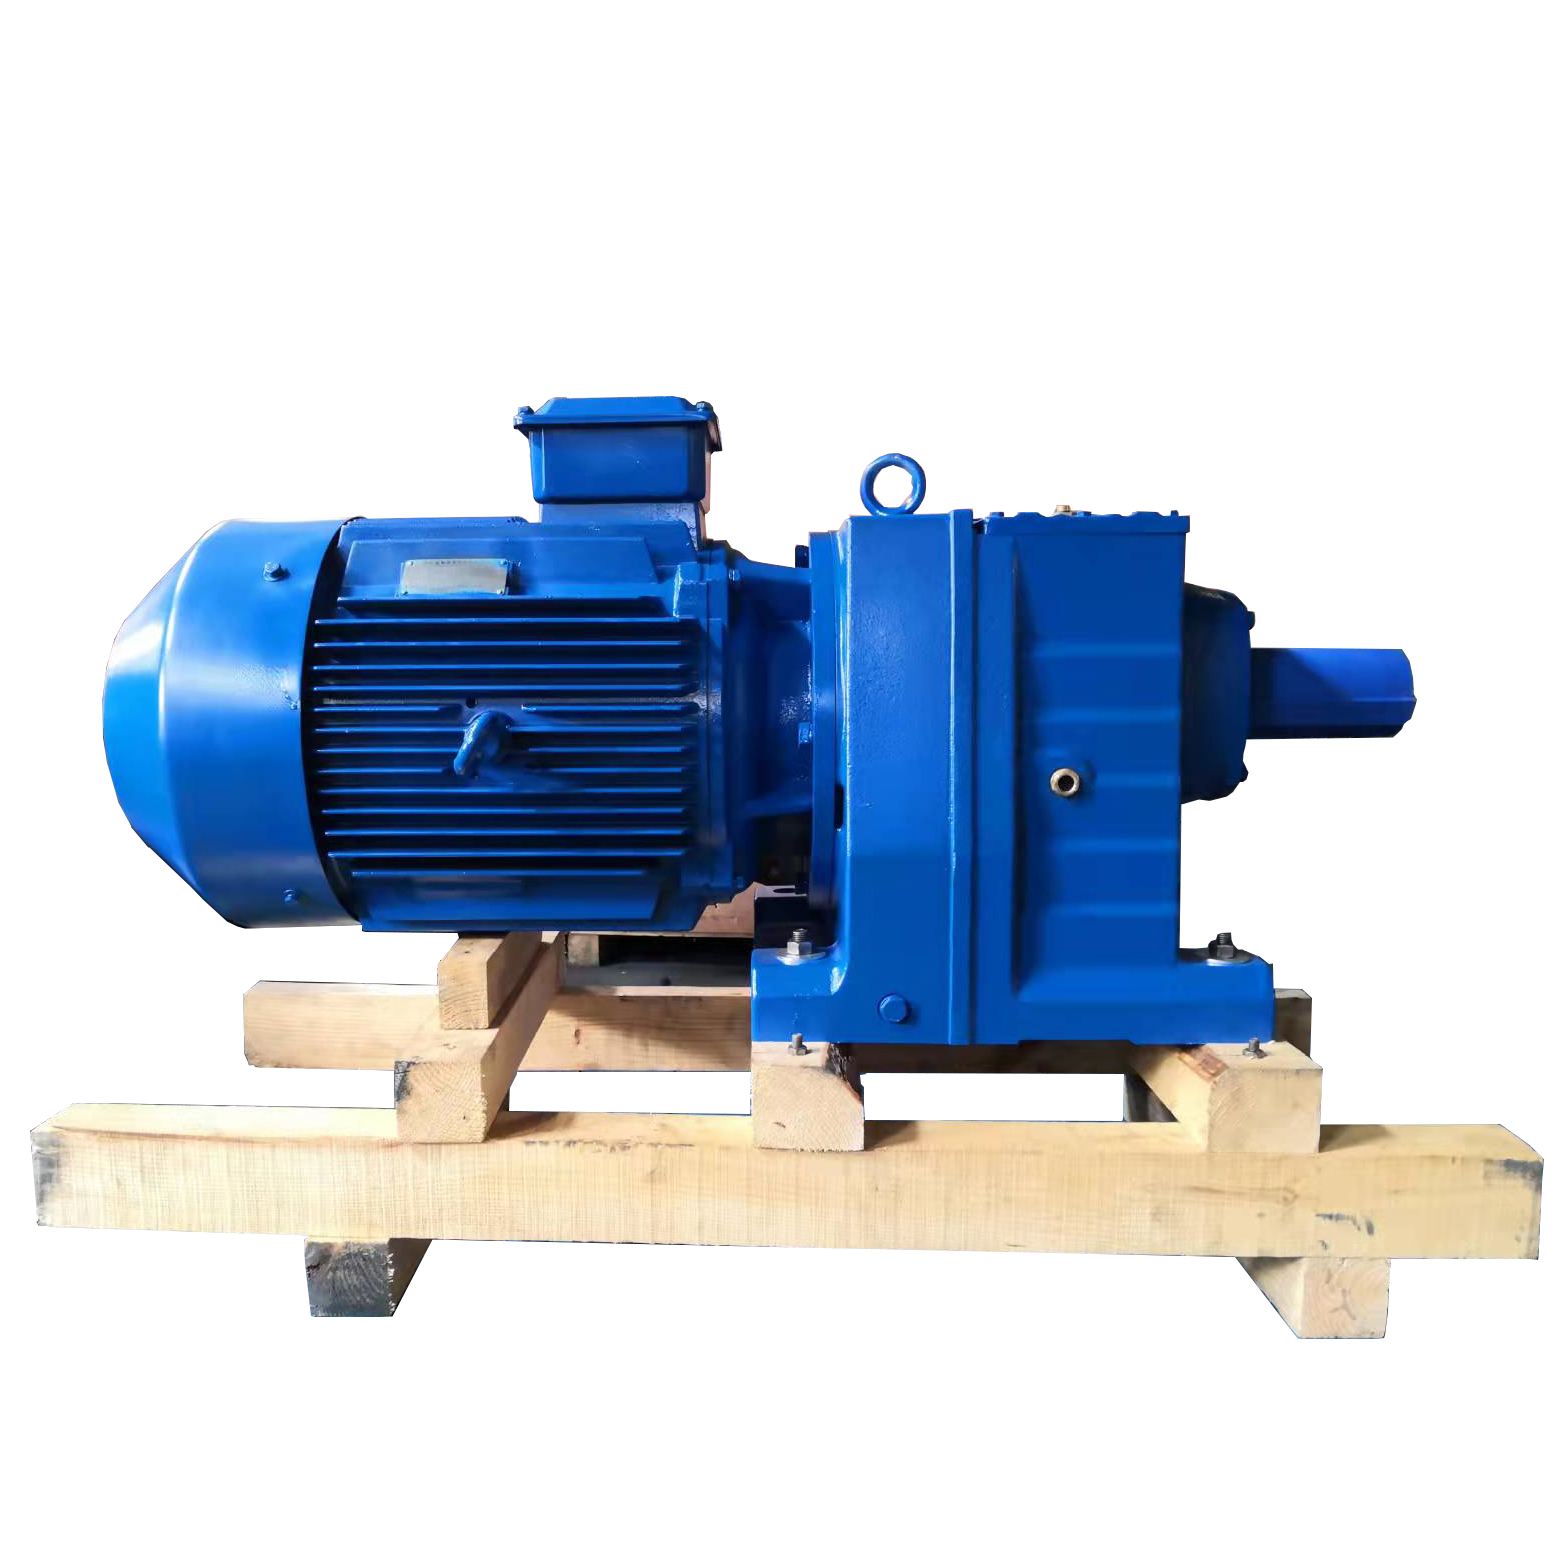 High quality 5 hp gearbox motor R37/47 helical speed reducer